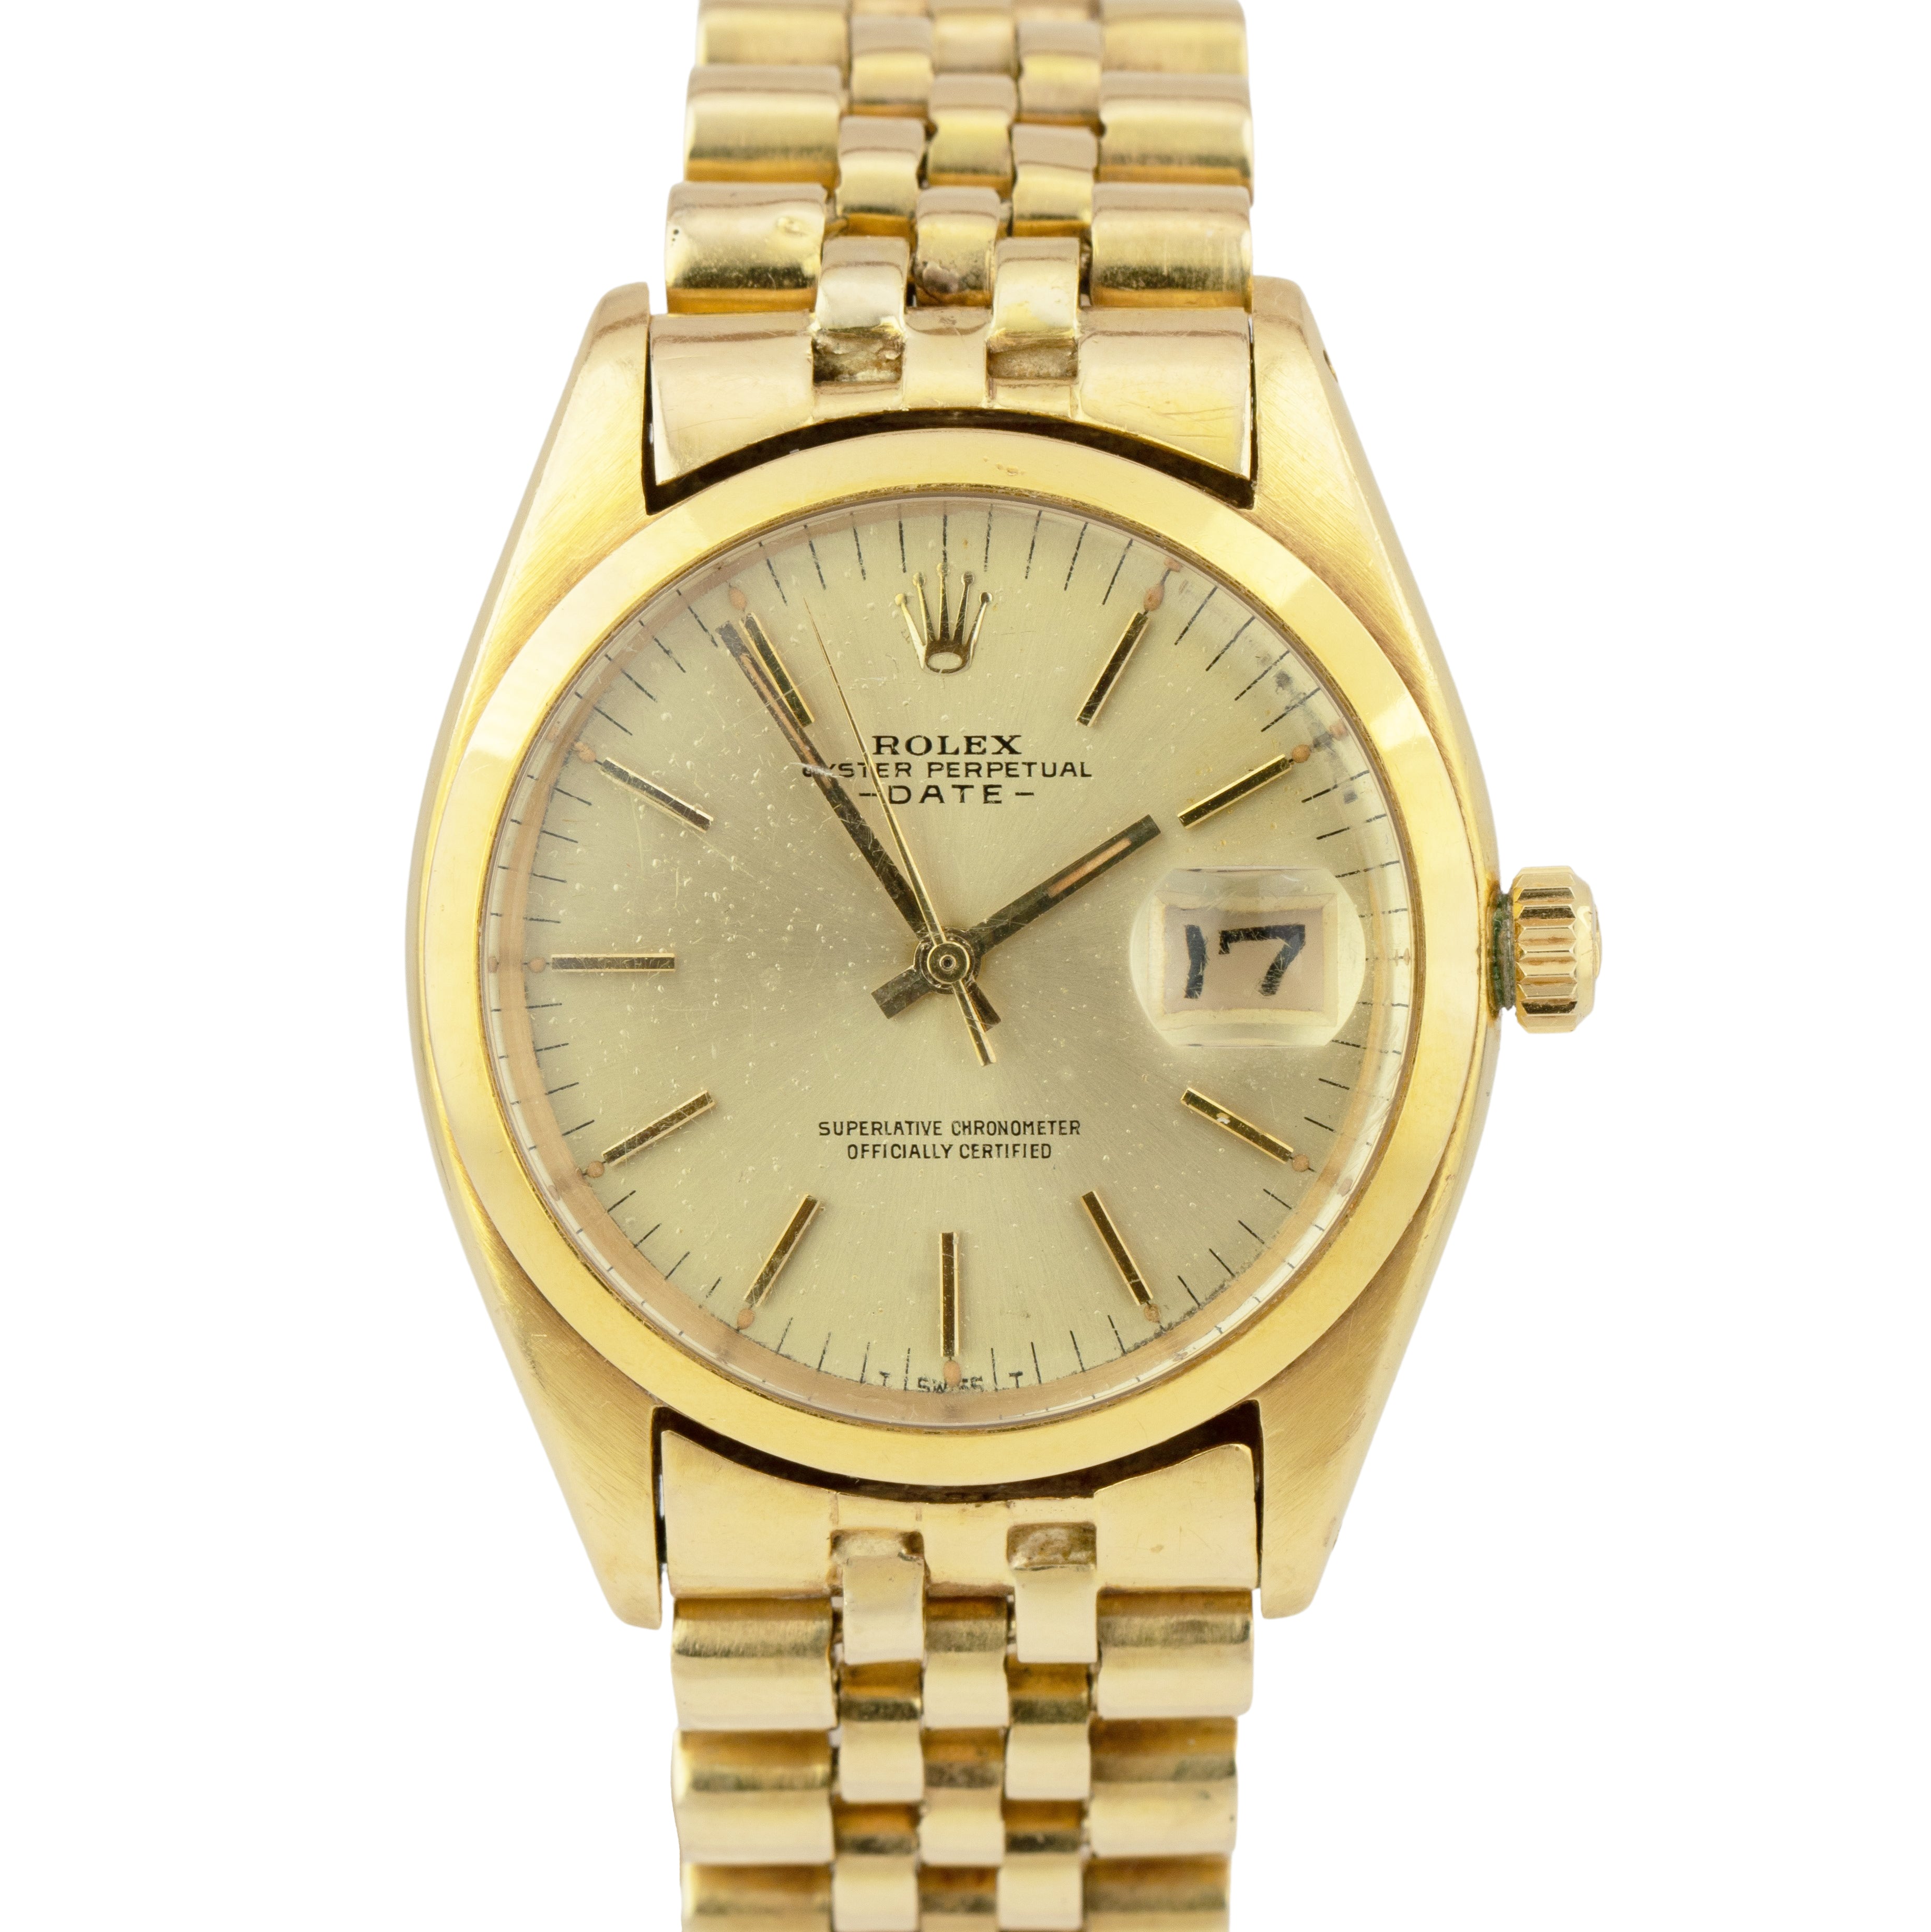 Vintage Rolex Oyster Date 34mm Champagne Yellow Gold Wat